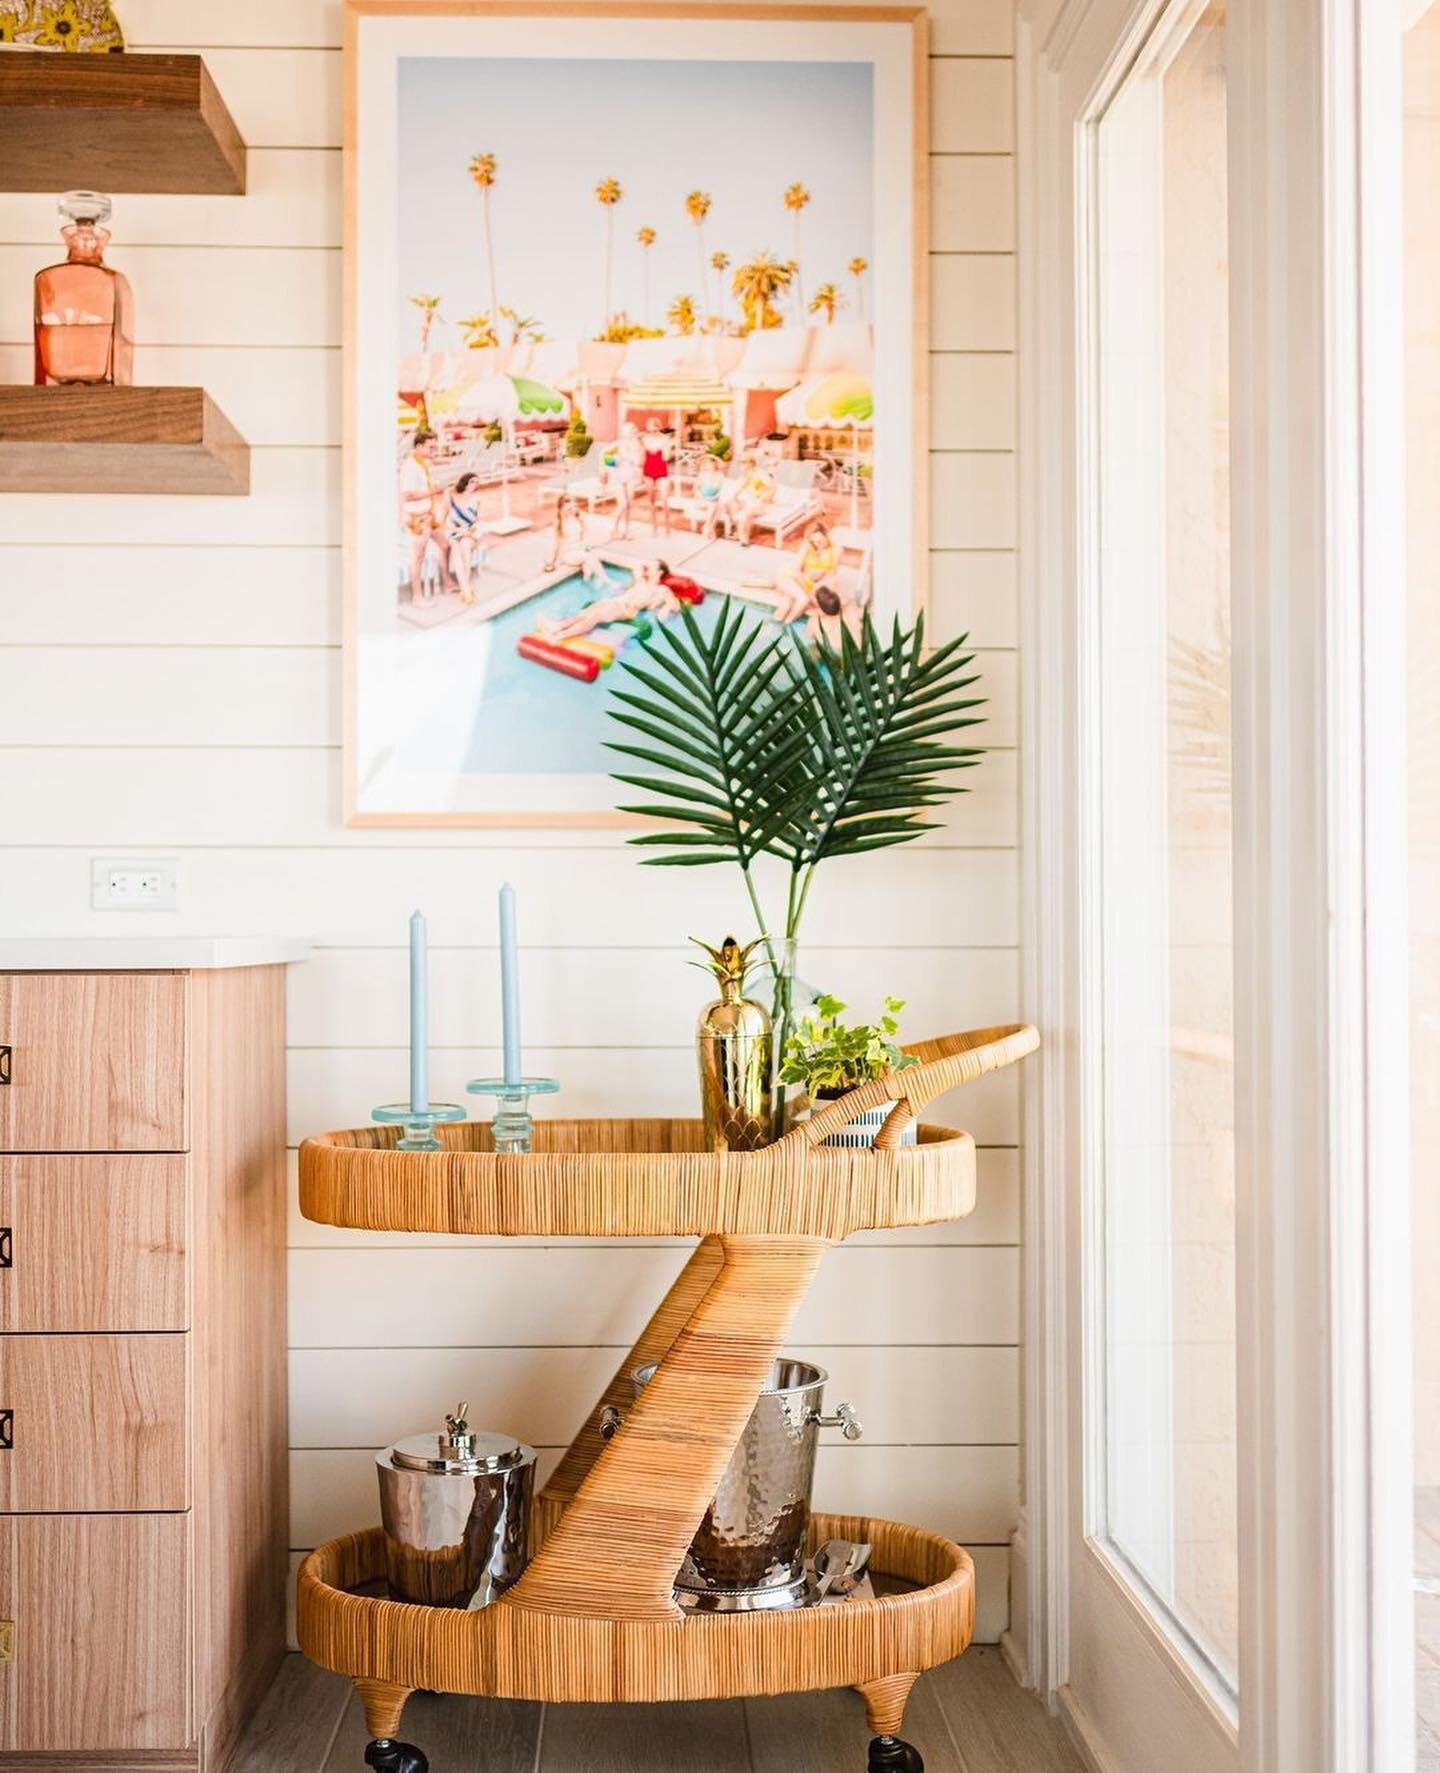 Cheers to the weekend with @madegoods 🥂

The Lulu Bar Cart made a lovely beachy addition to this space designed by @made_designcompany! Everything about this bar cart is perfection from the wrapped rattan to the castor wheels that make the bar cart 